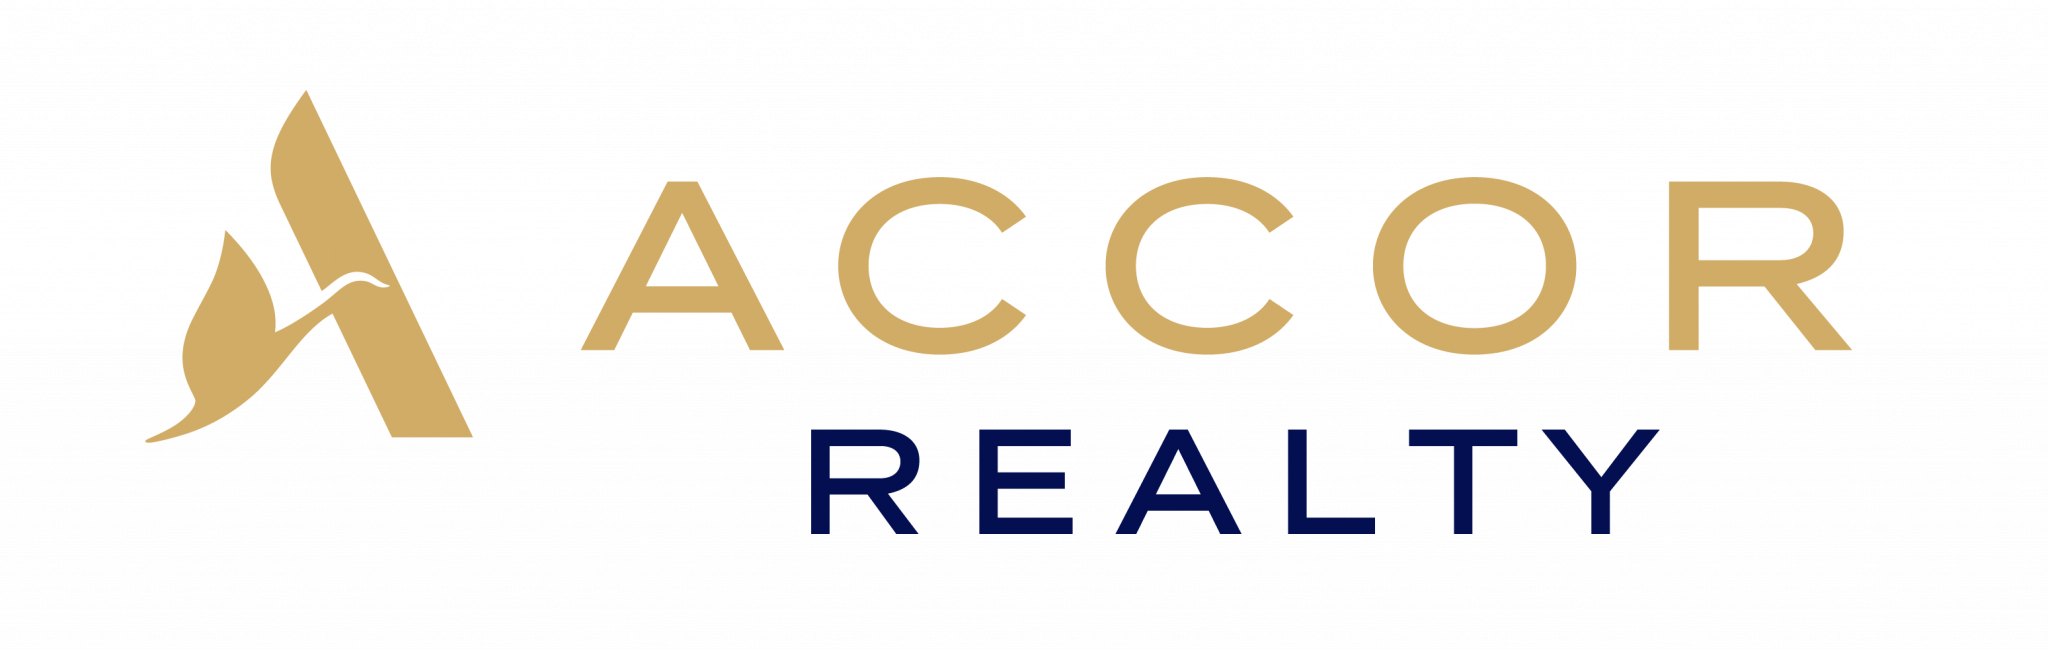 Real Estate Agency Accor Realty